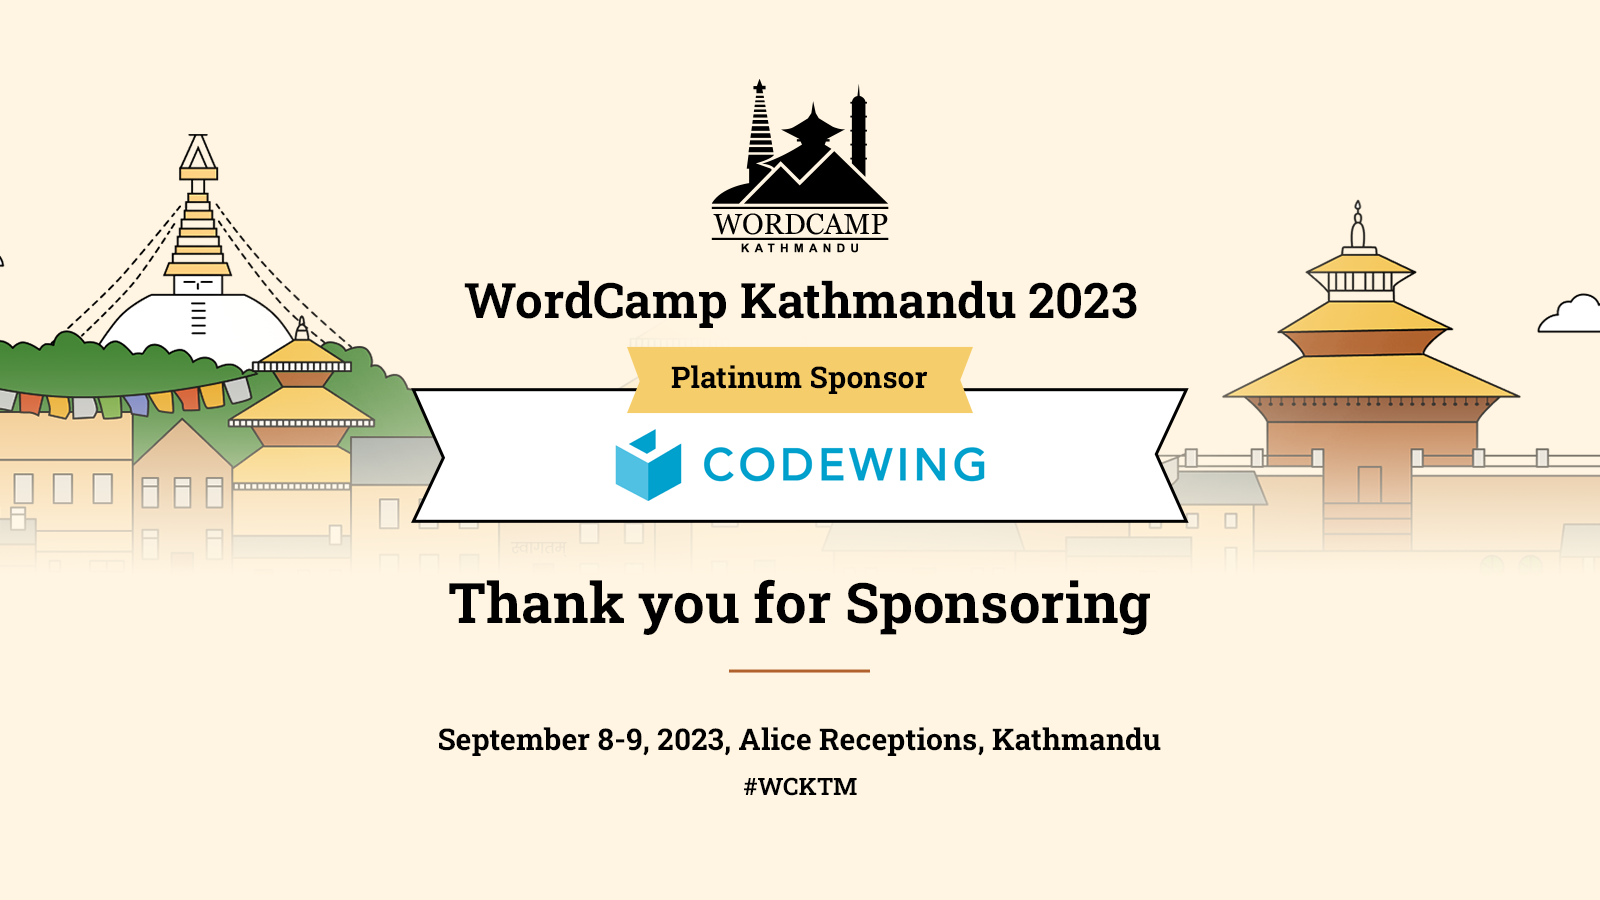 Thank you Codewing Solutions for sponsoring